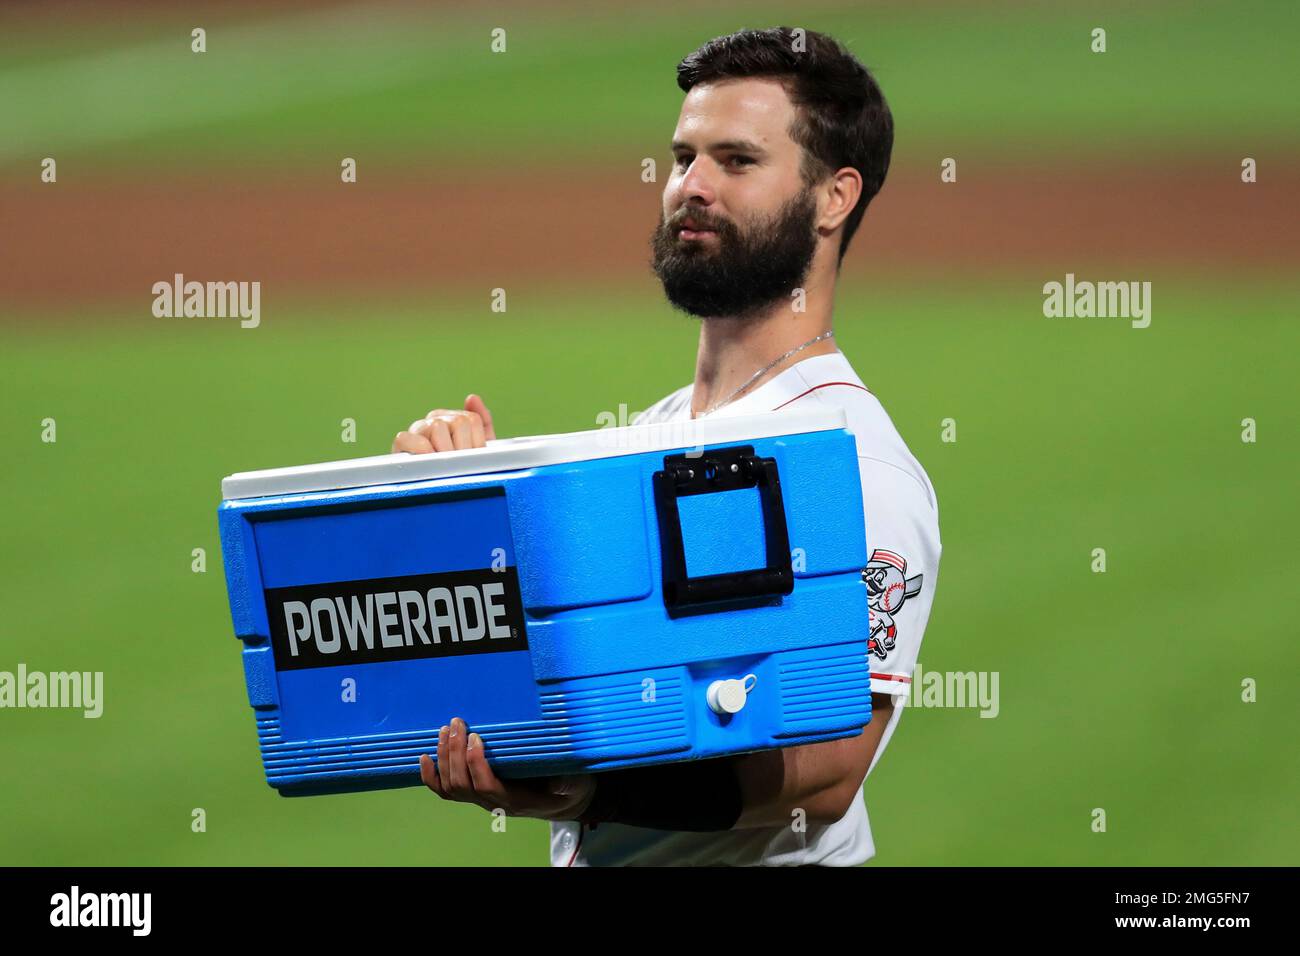 Cincinnati Reds' Jesse Winker carries a Powerade cooler after a baseball  game against the St. Louis Cardinals in Cincinnati, Wednesday, Sep. 2,  2020. The Reds won 4-3. (AP Photo/Aaron Doster Stock Photo - Alamy